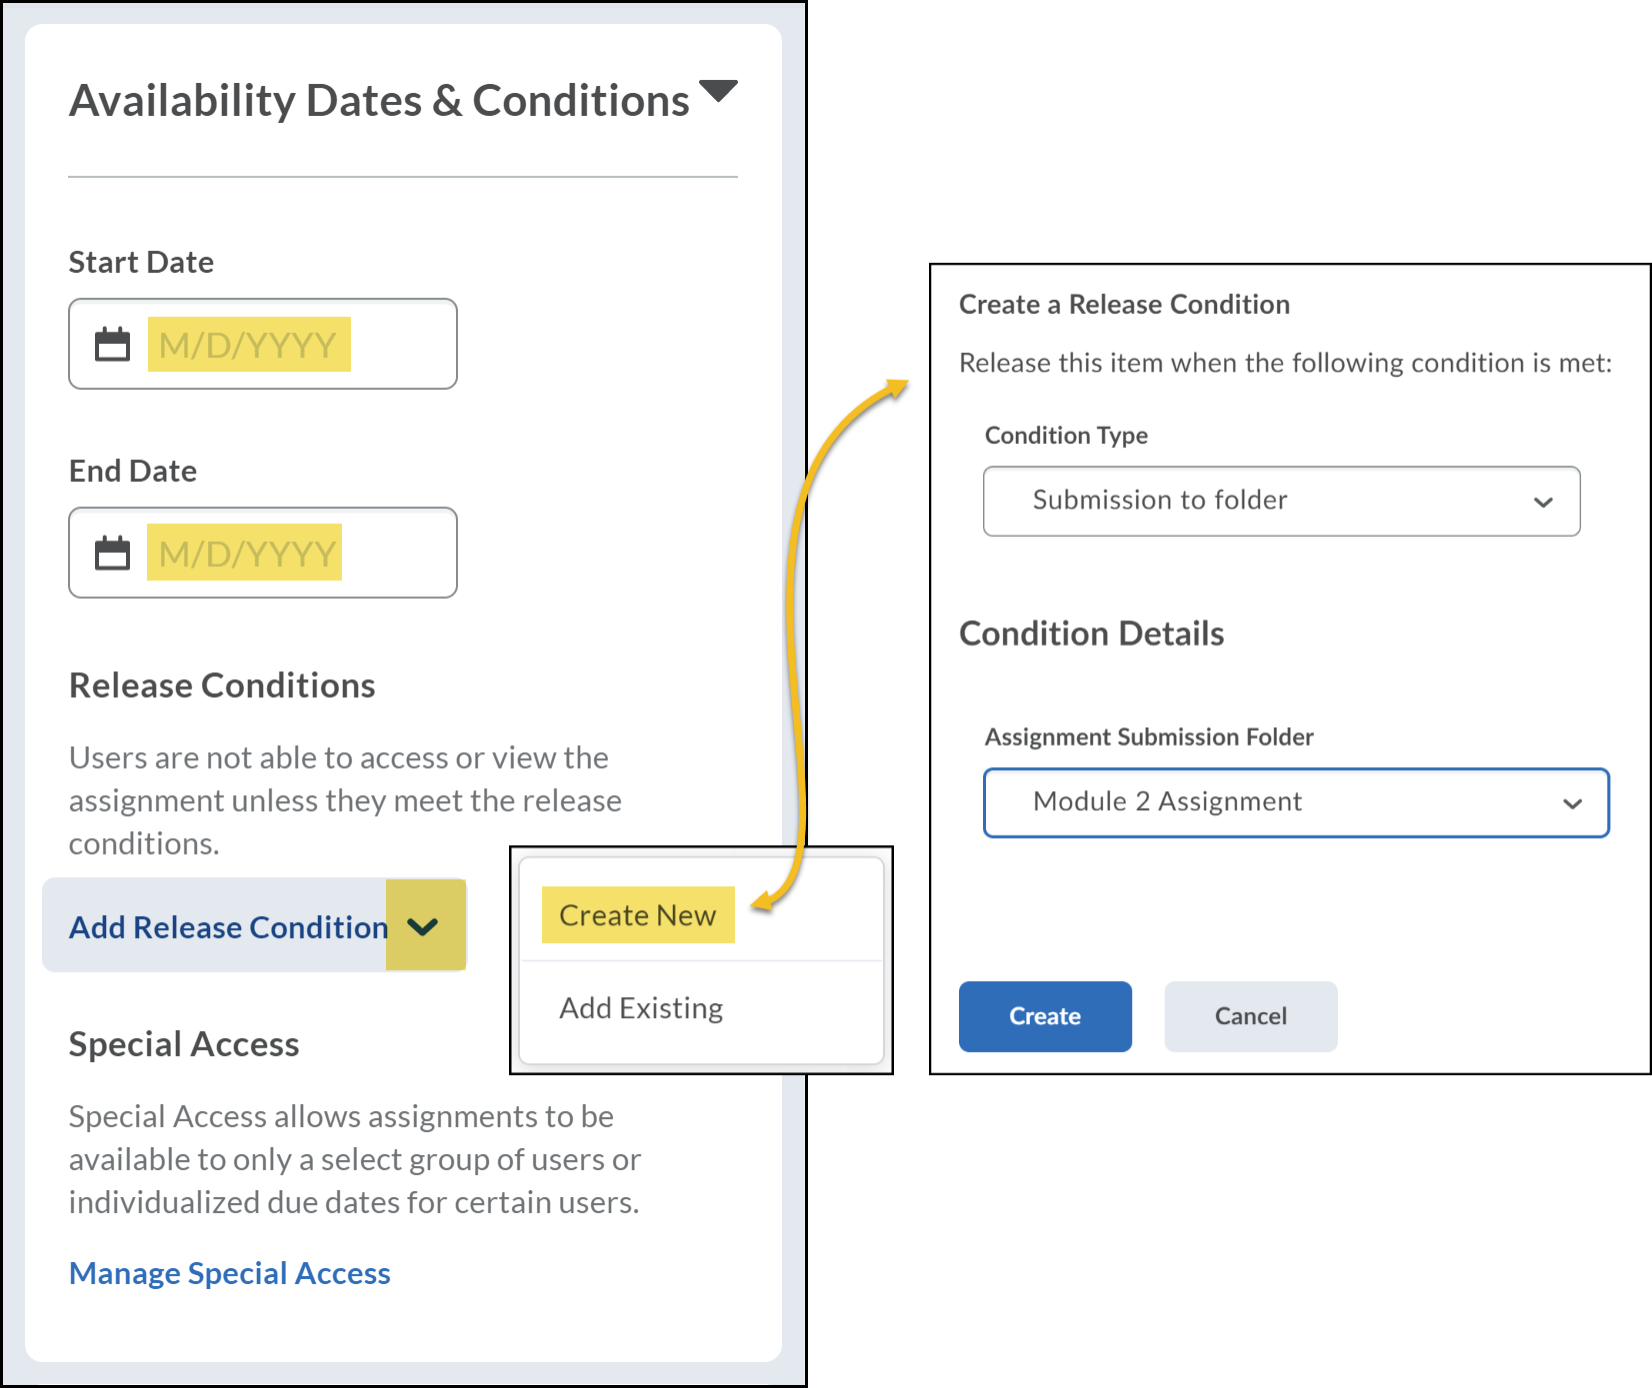 Availability Dates & Conditions window expanded to Start/End Date and Release Conditions. Arrow pointing to new Release conditions window. Condition Type and Condition Details choices available.